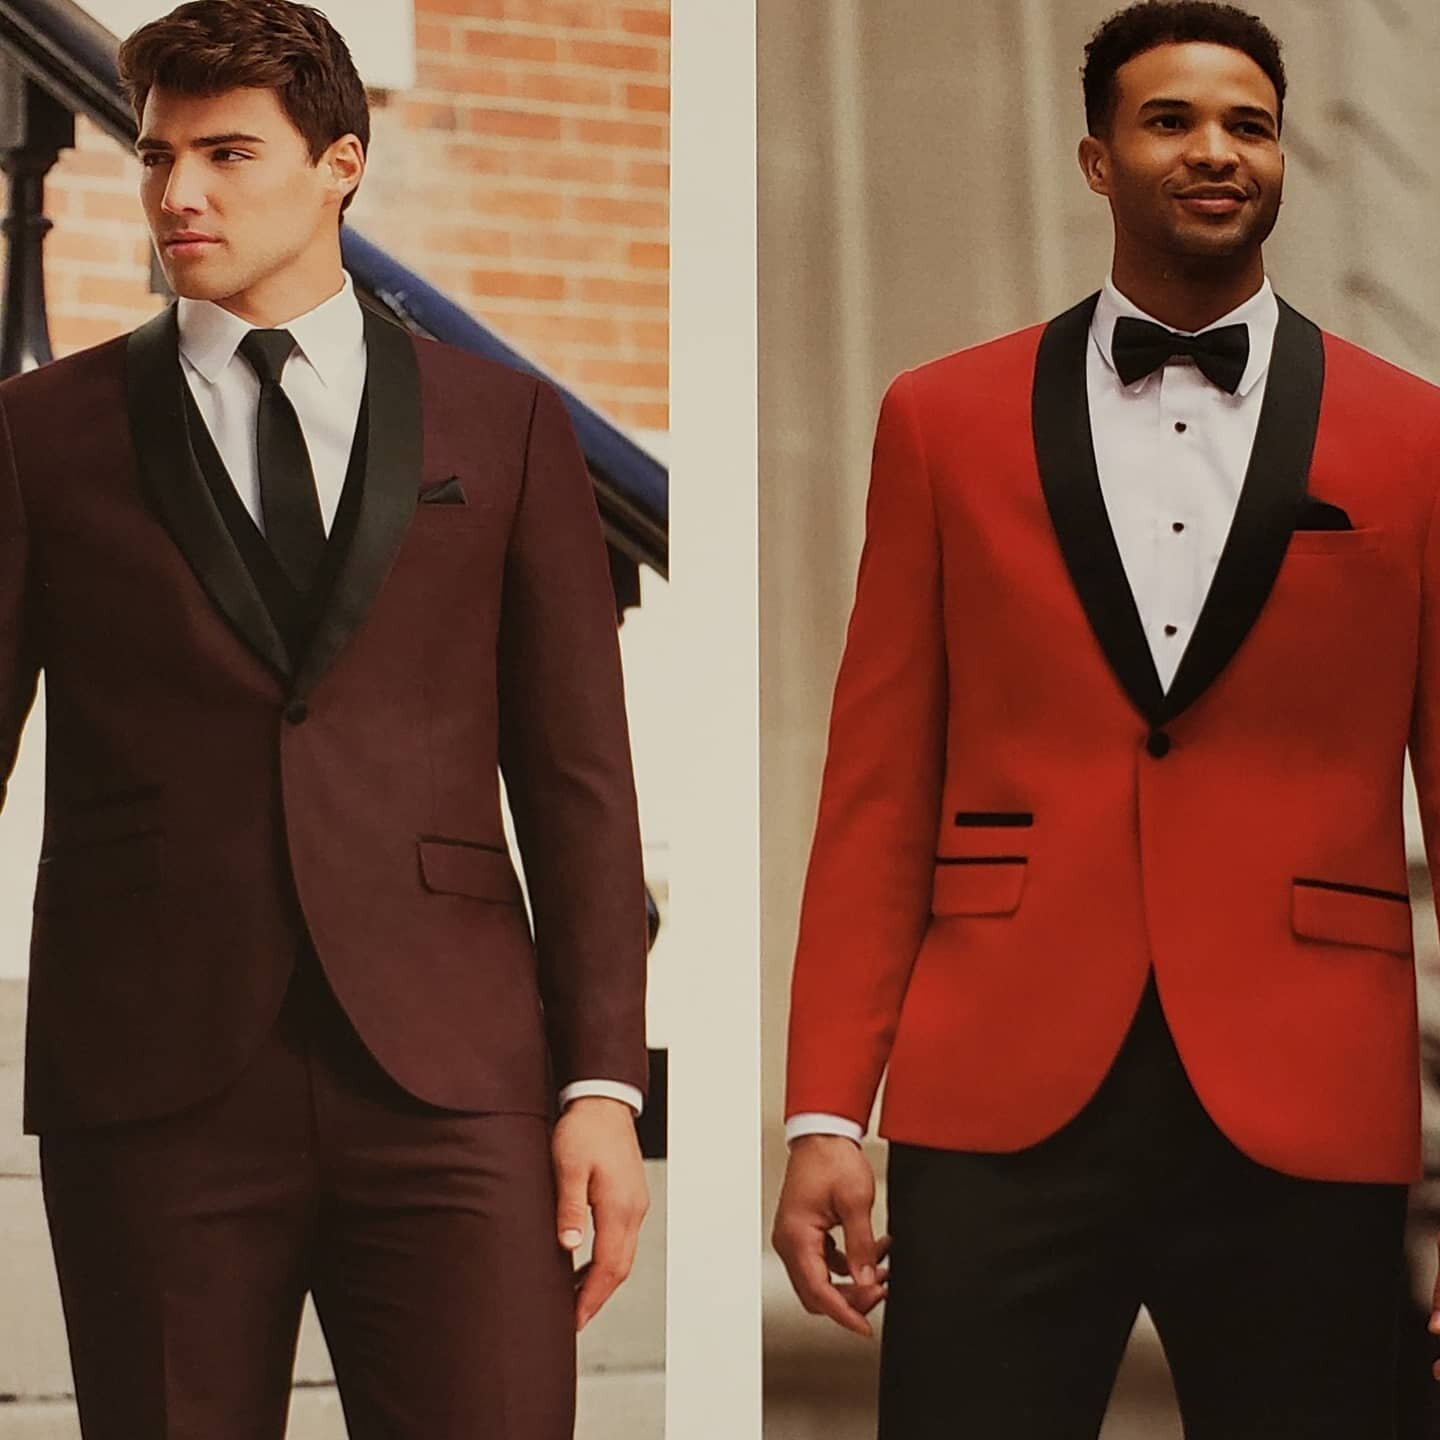 New 2021 Tuxedo suits arrived at the store today!
#2021weddingseason #prom #grooms #Regency